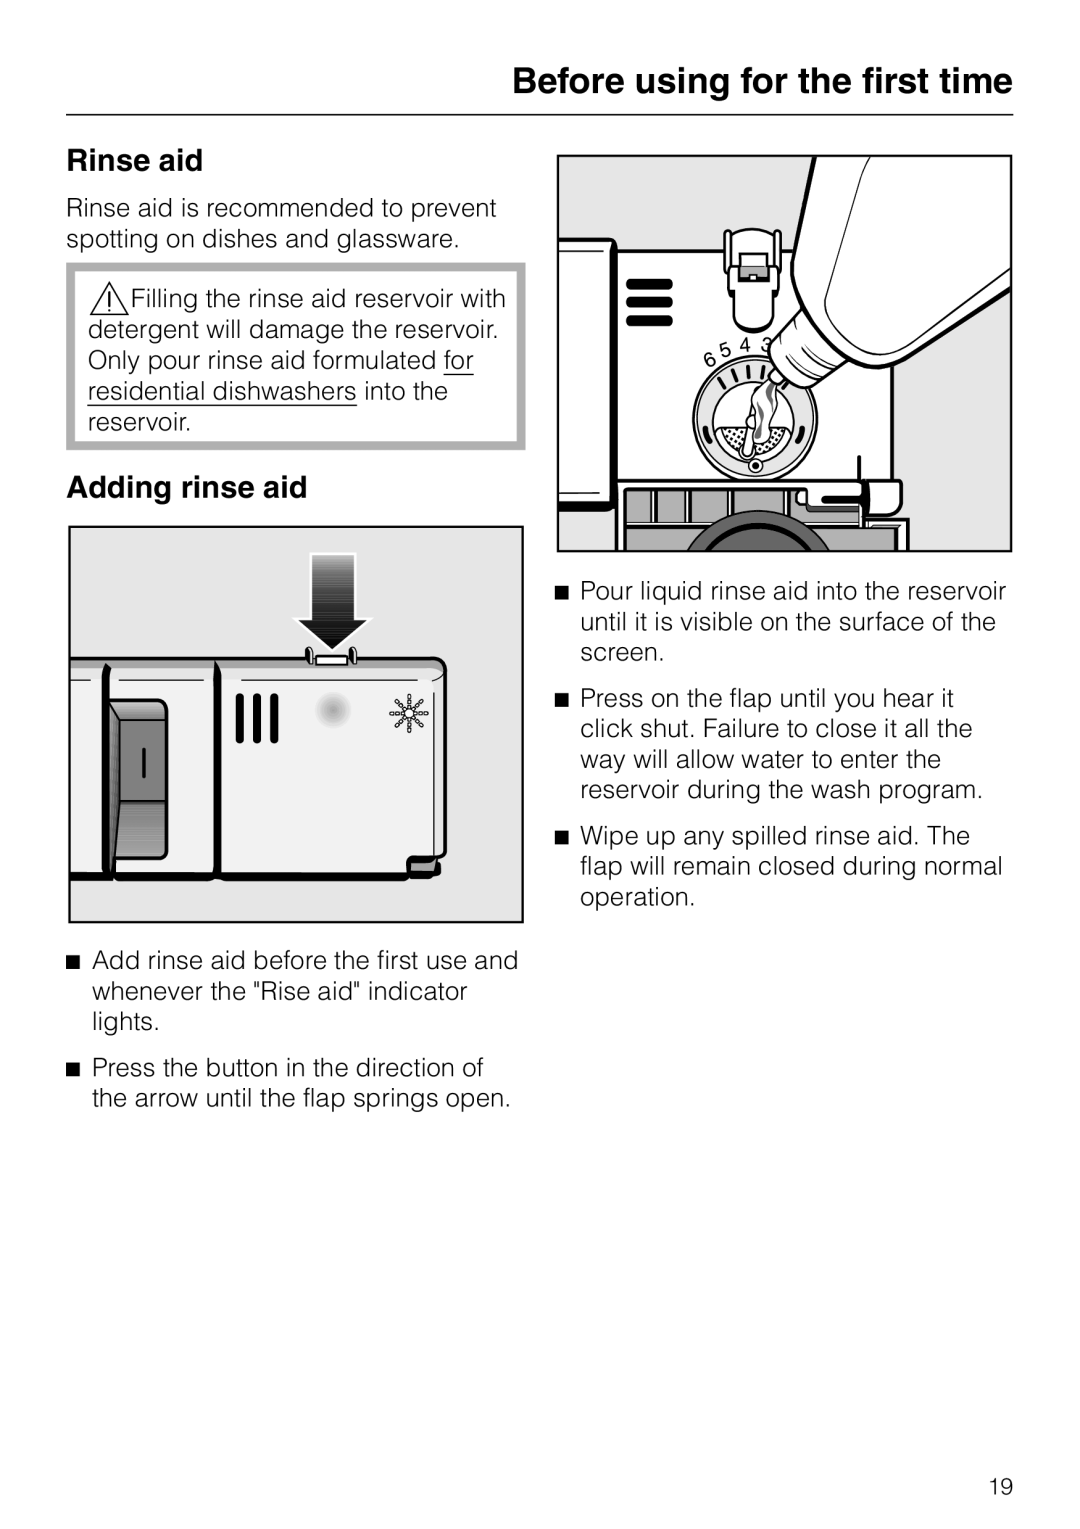 Miele G892SC operating instructions Rinse aid, Adding rinse aid, Before using for the first time 